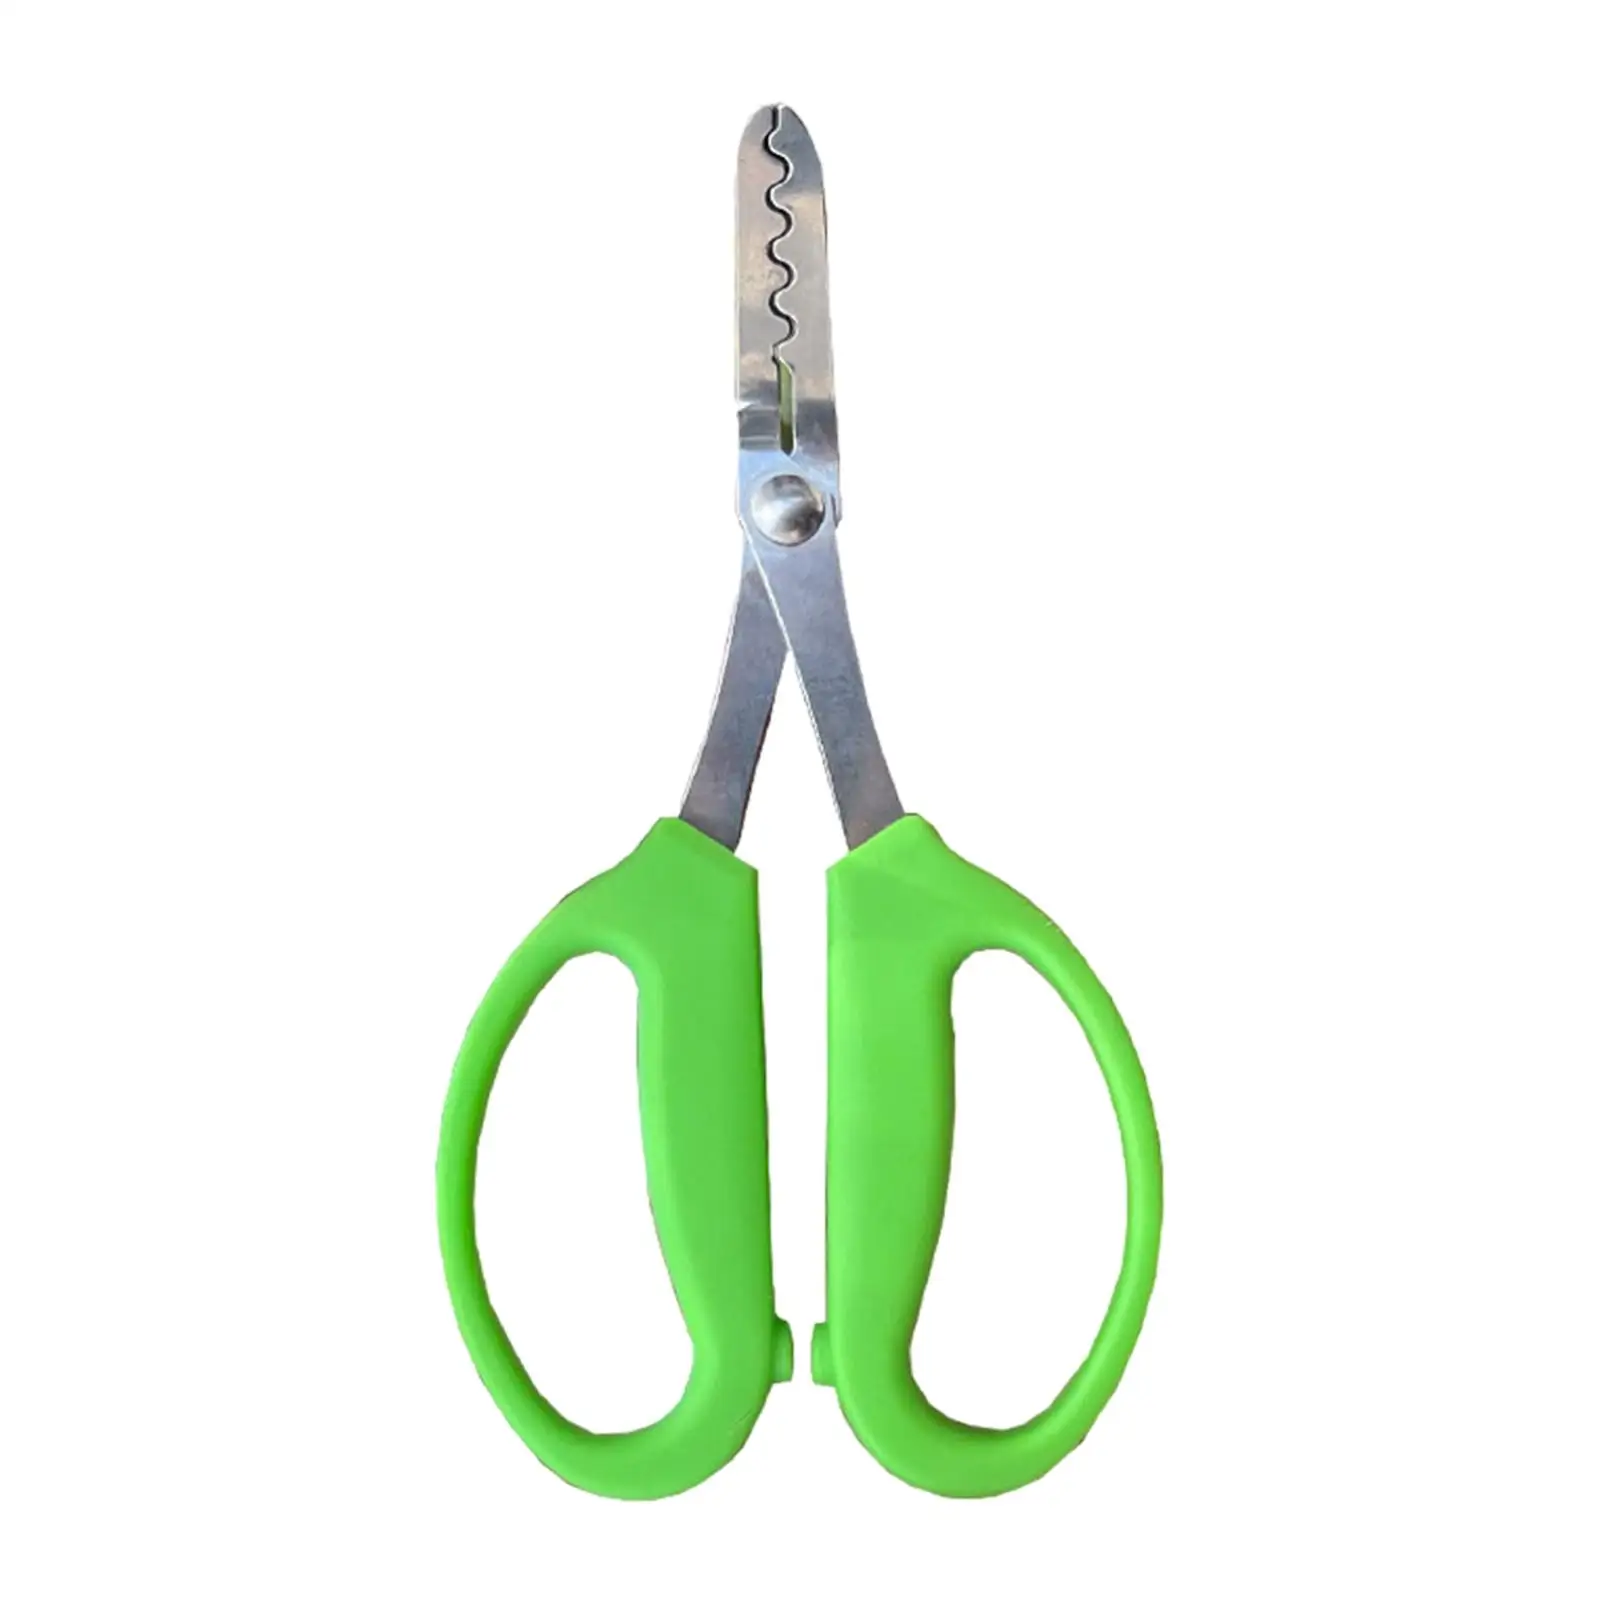 Garden Weeder Hand Tool Weeding Scissors Smooth Sturdy Manual Weed Puller Remover Weed Pulling Tool for Potted Plants Bonsai